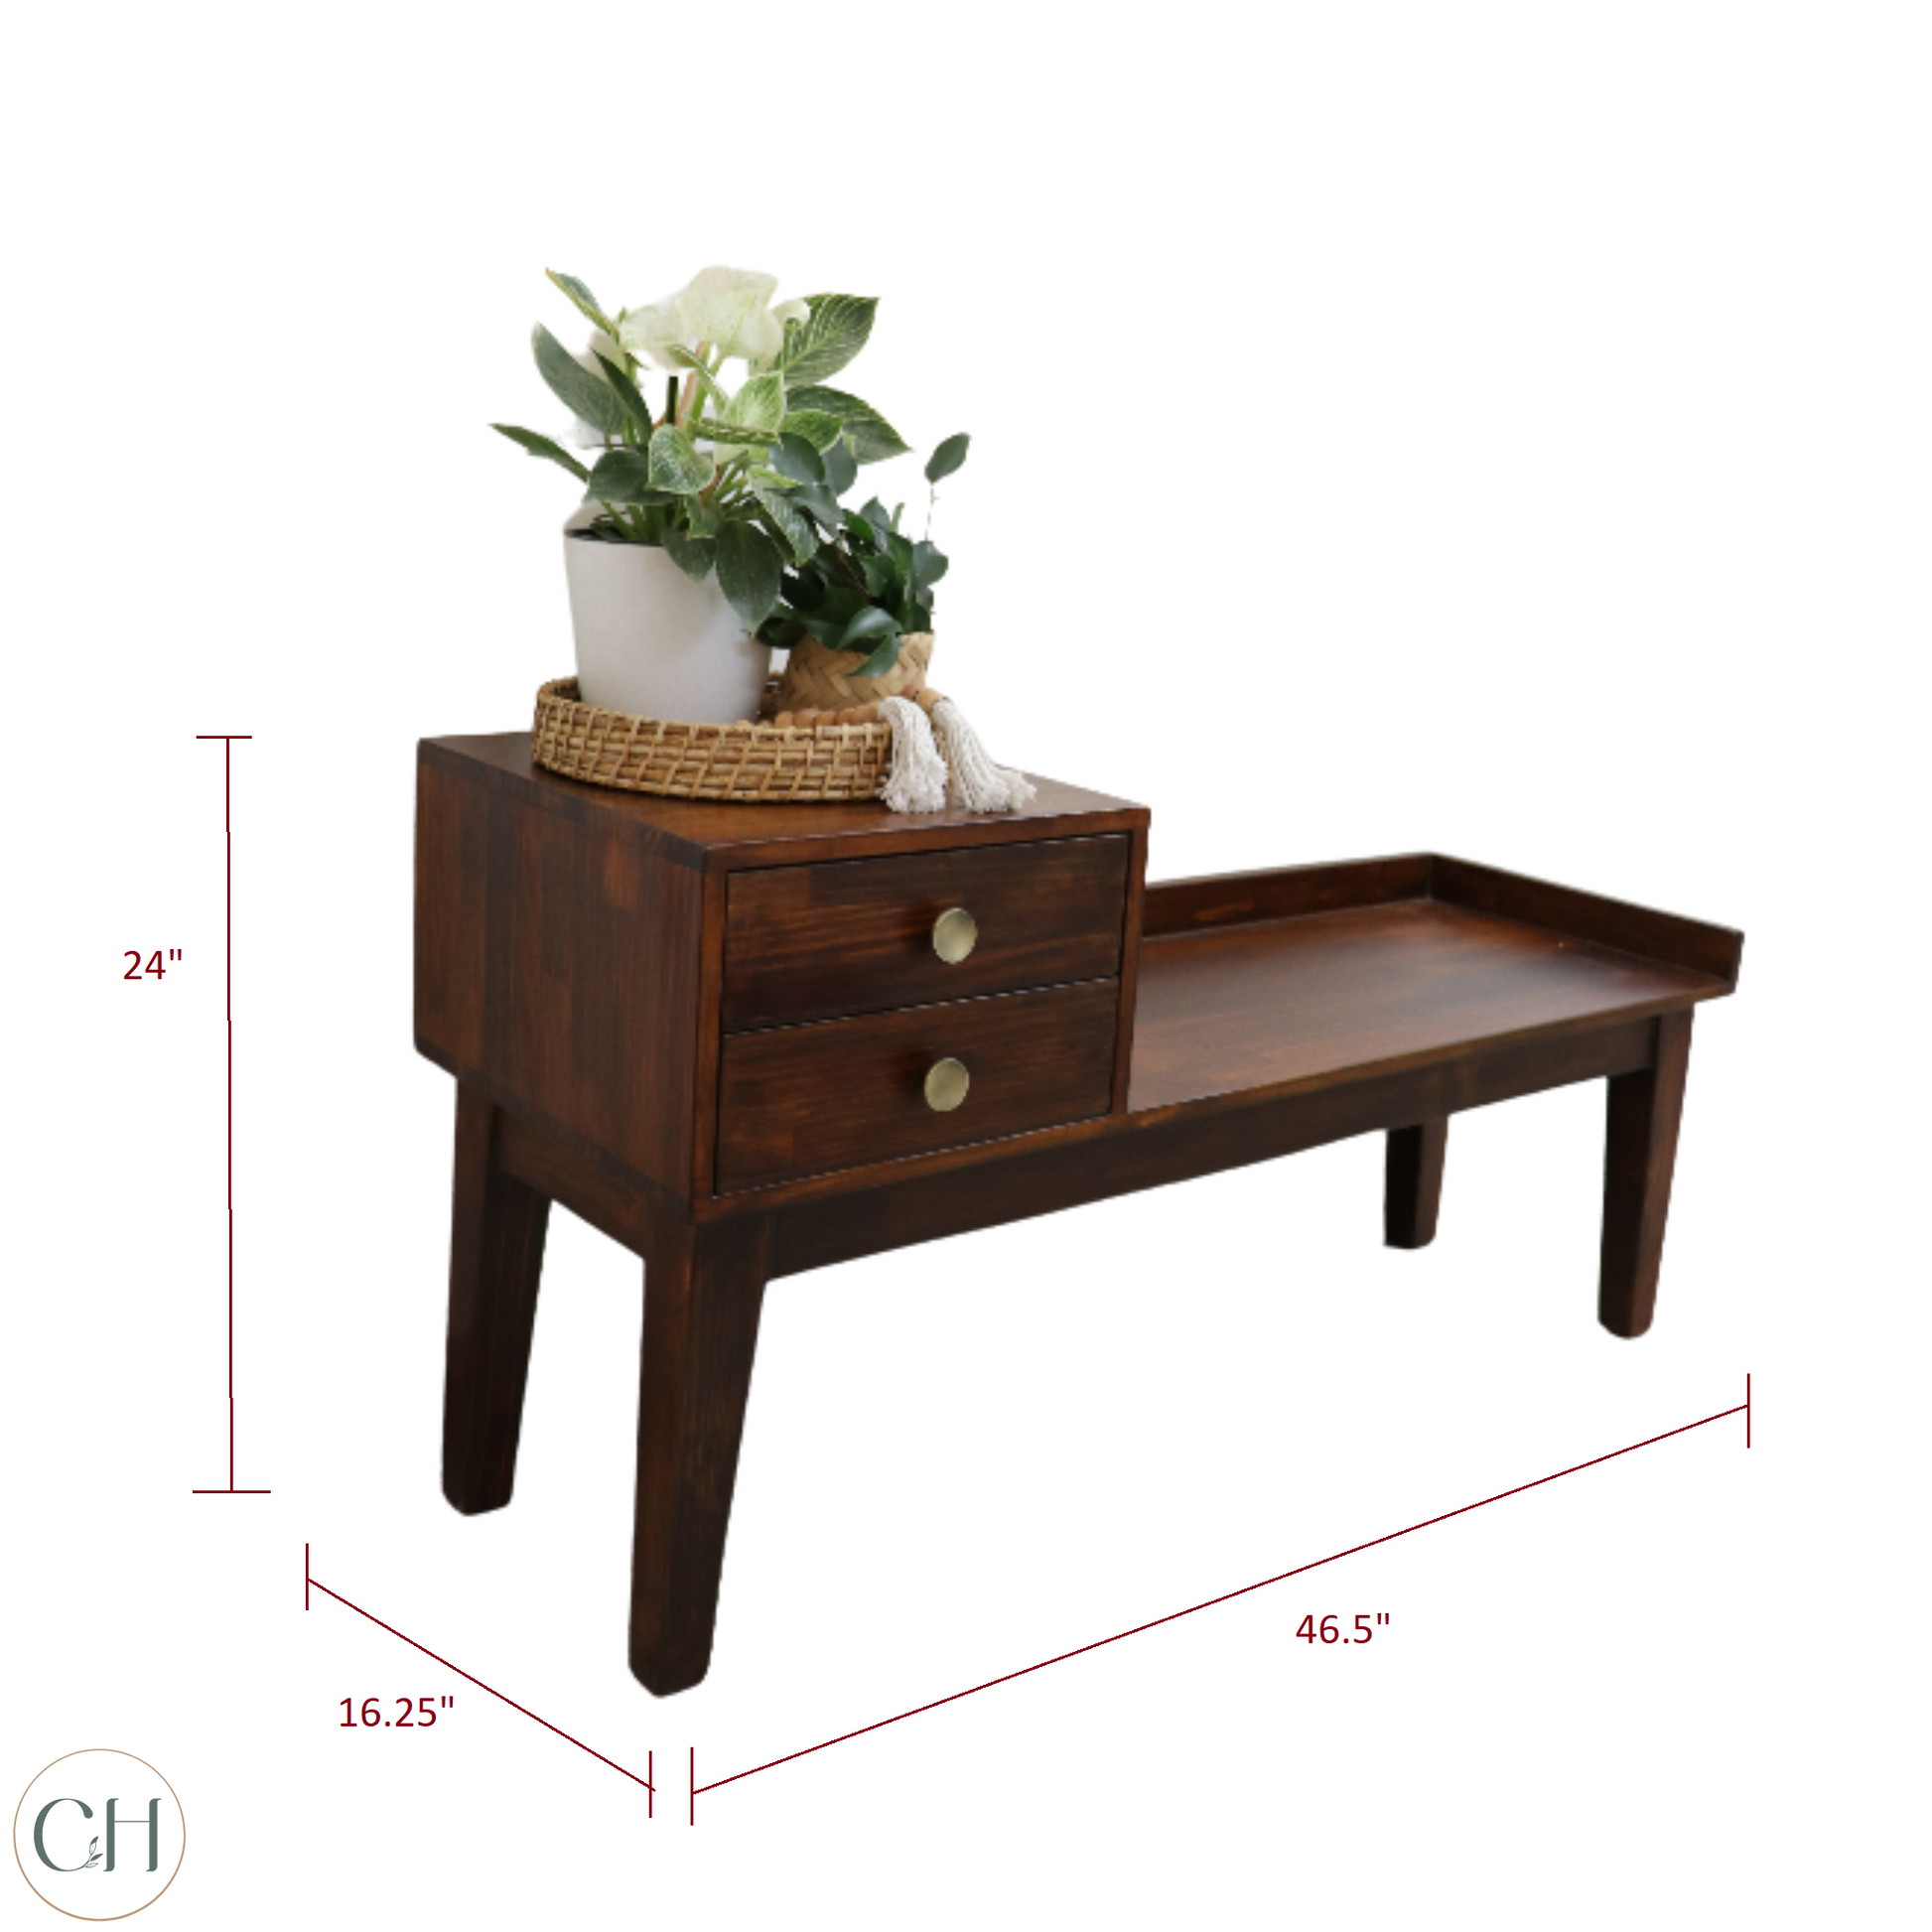 CustHum - solid wood transitional bench with 2 drawers (dimensions)